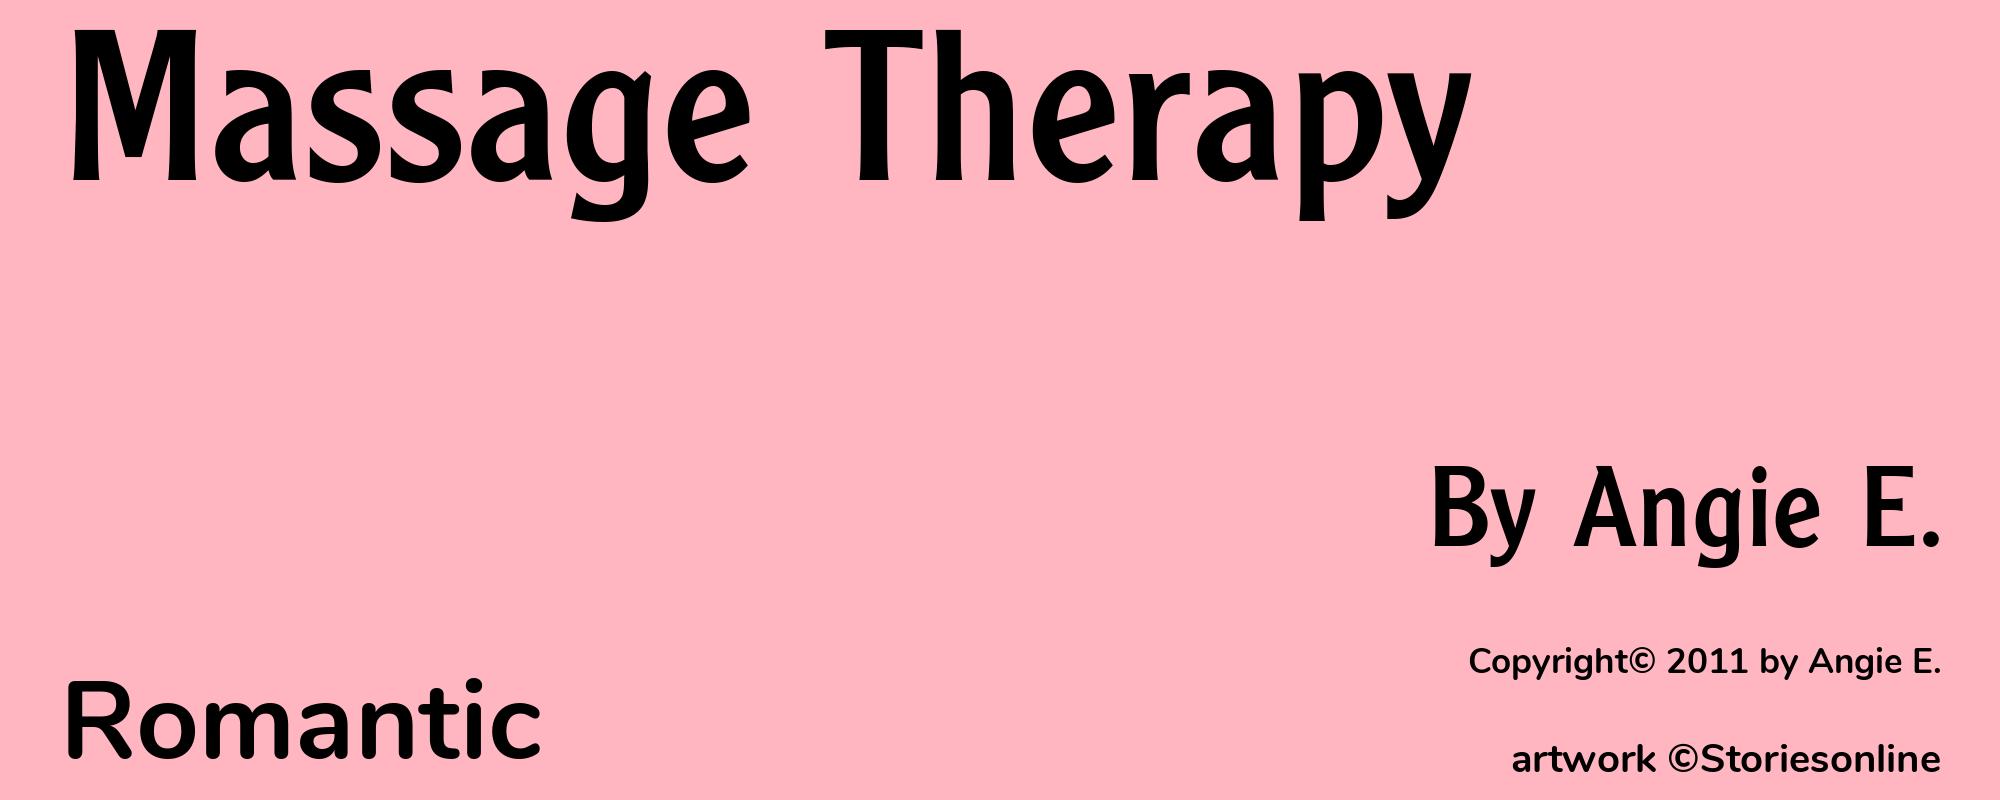 Massage Therapy - Cover